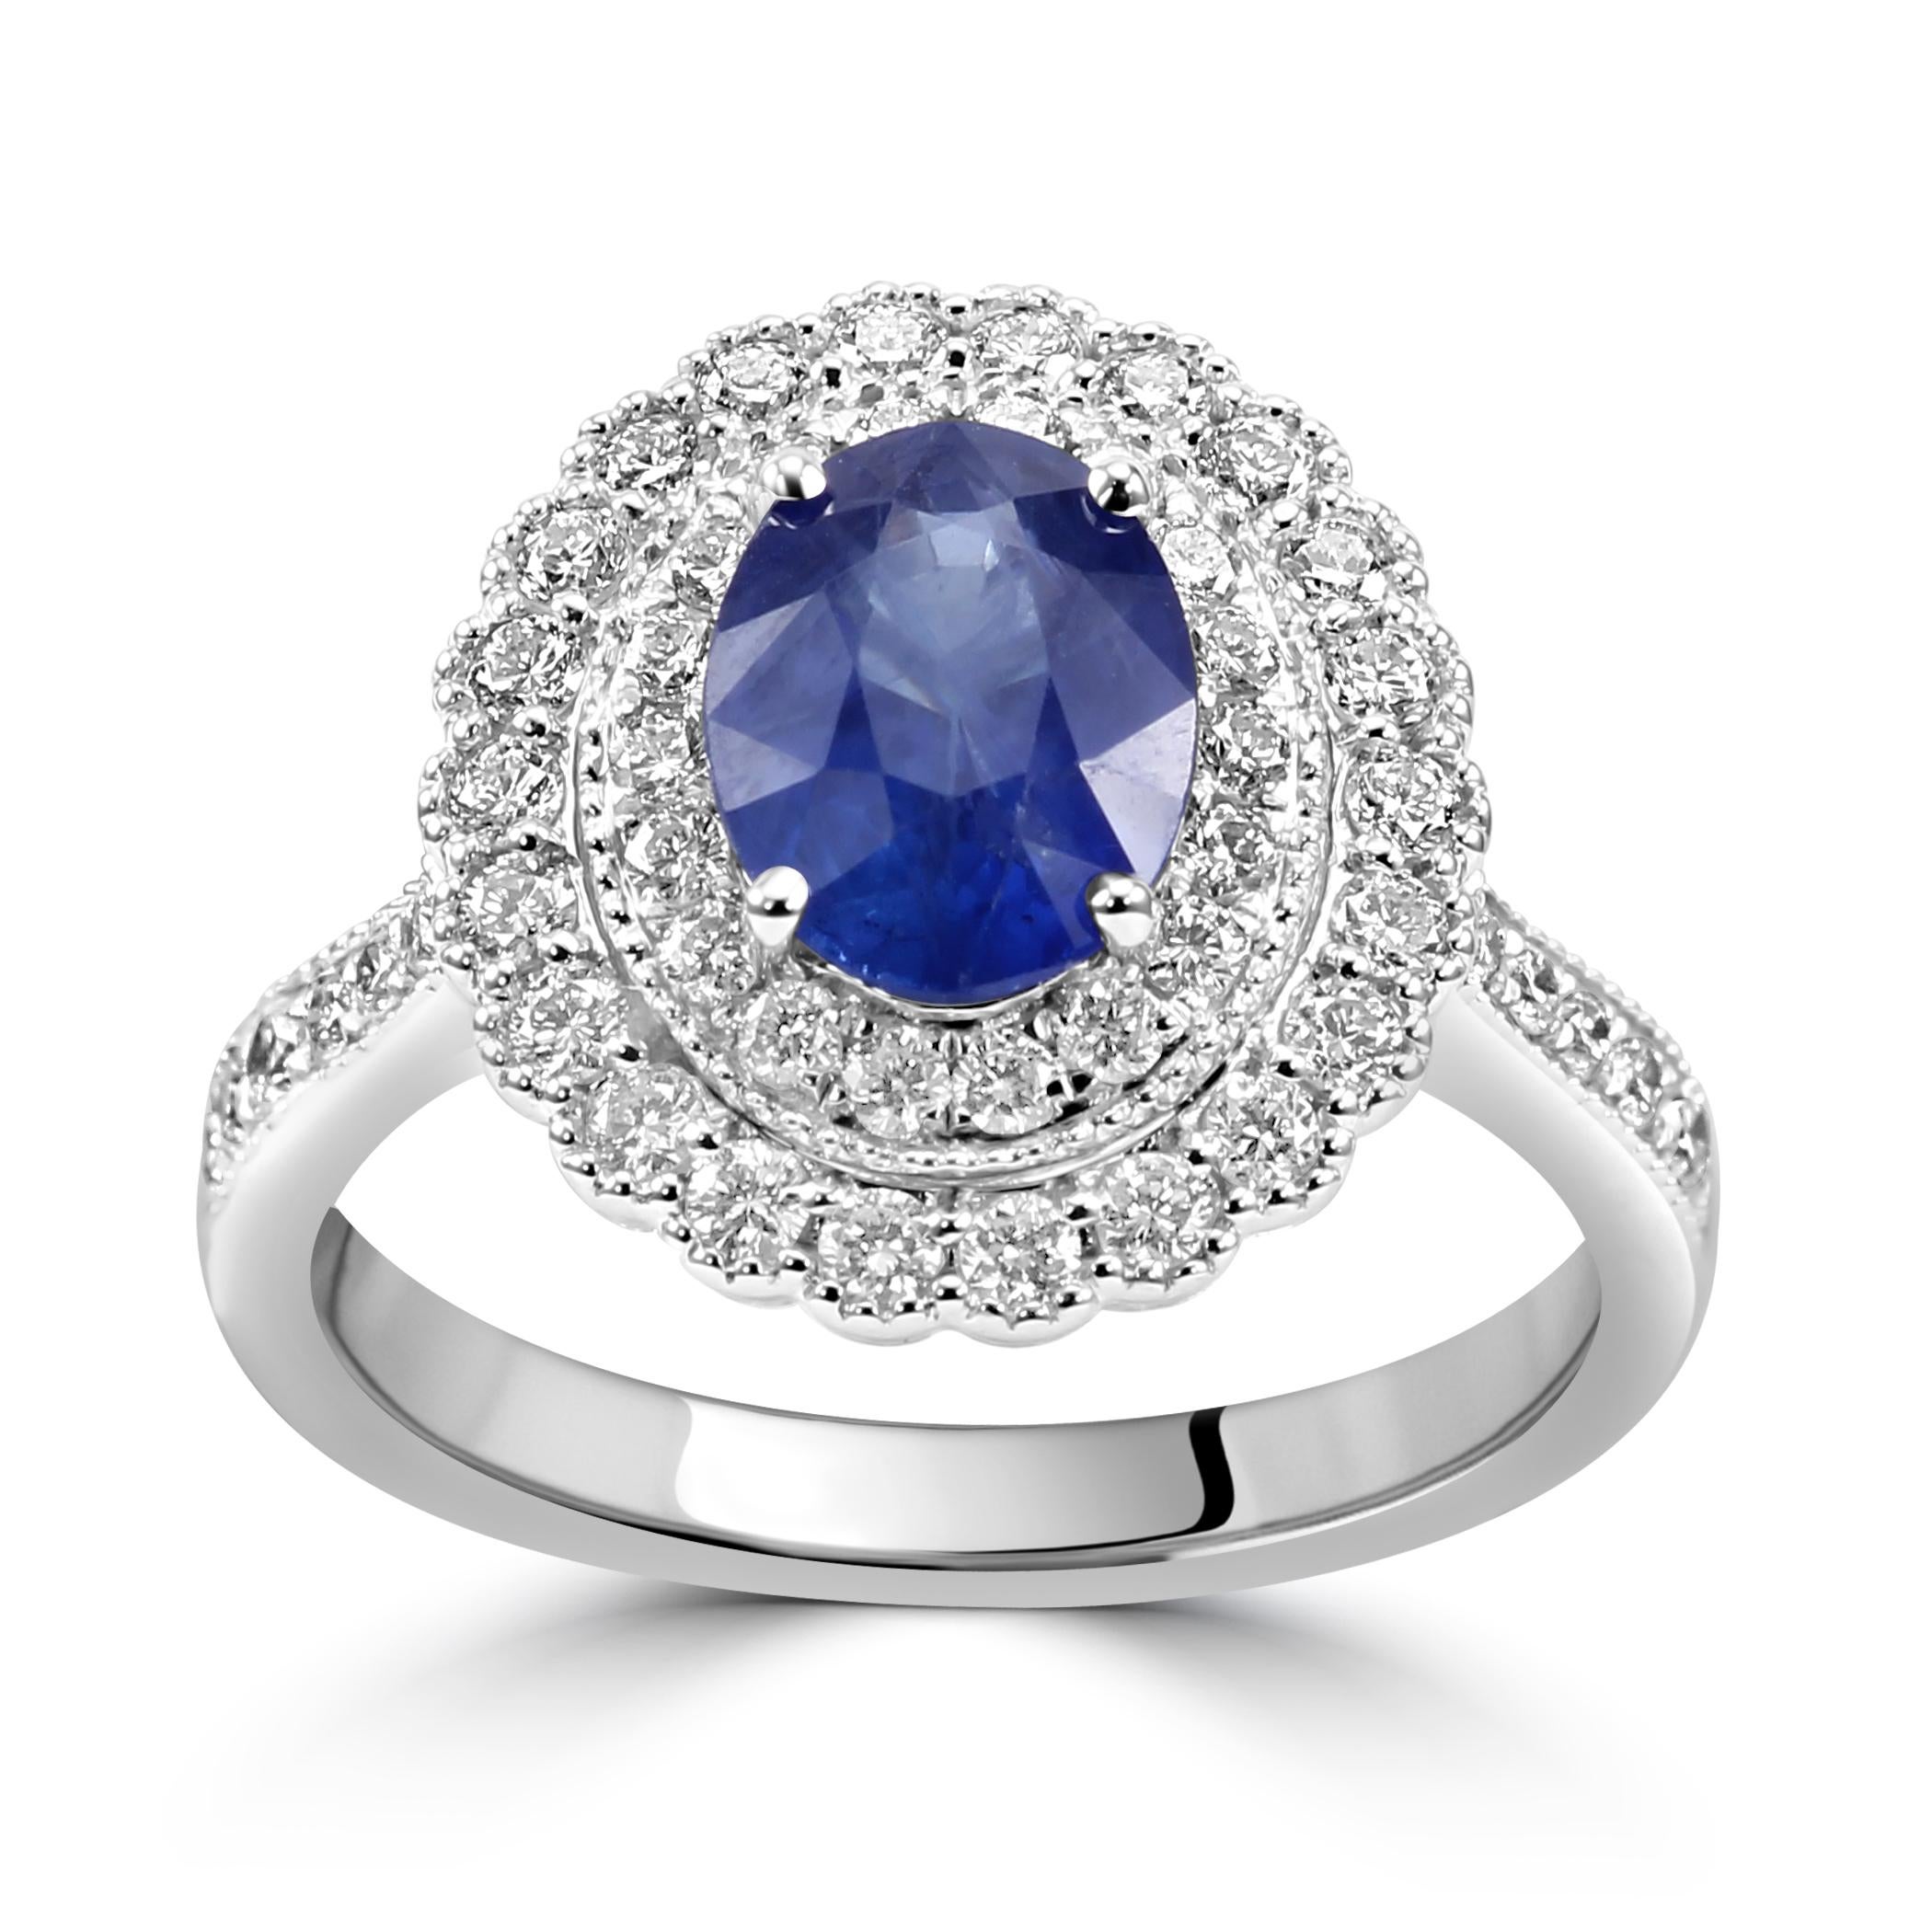 
Step into a world of timeless elegance with our fashion bridal ring, a breathtaking symbol of everlasting love and sophistication. 

At the ring's heart lies a mesmerizing Ceylon Sapphire, boasting a captivating deep blue hue and weighing 1.83